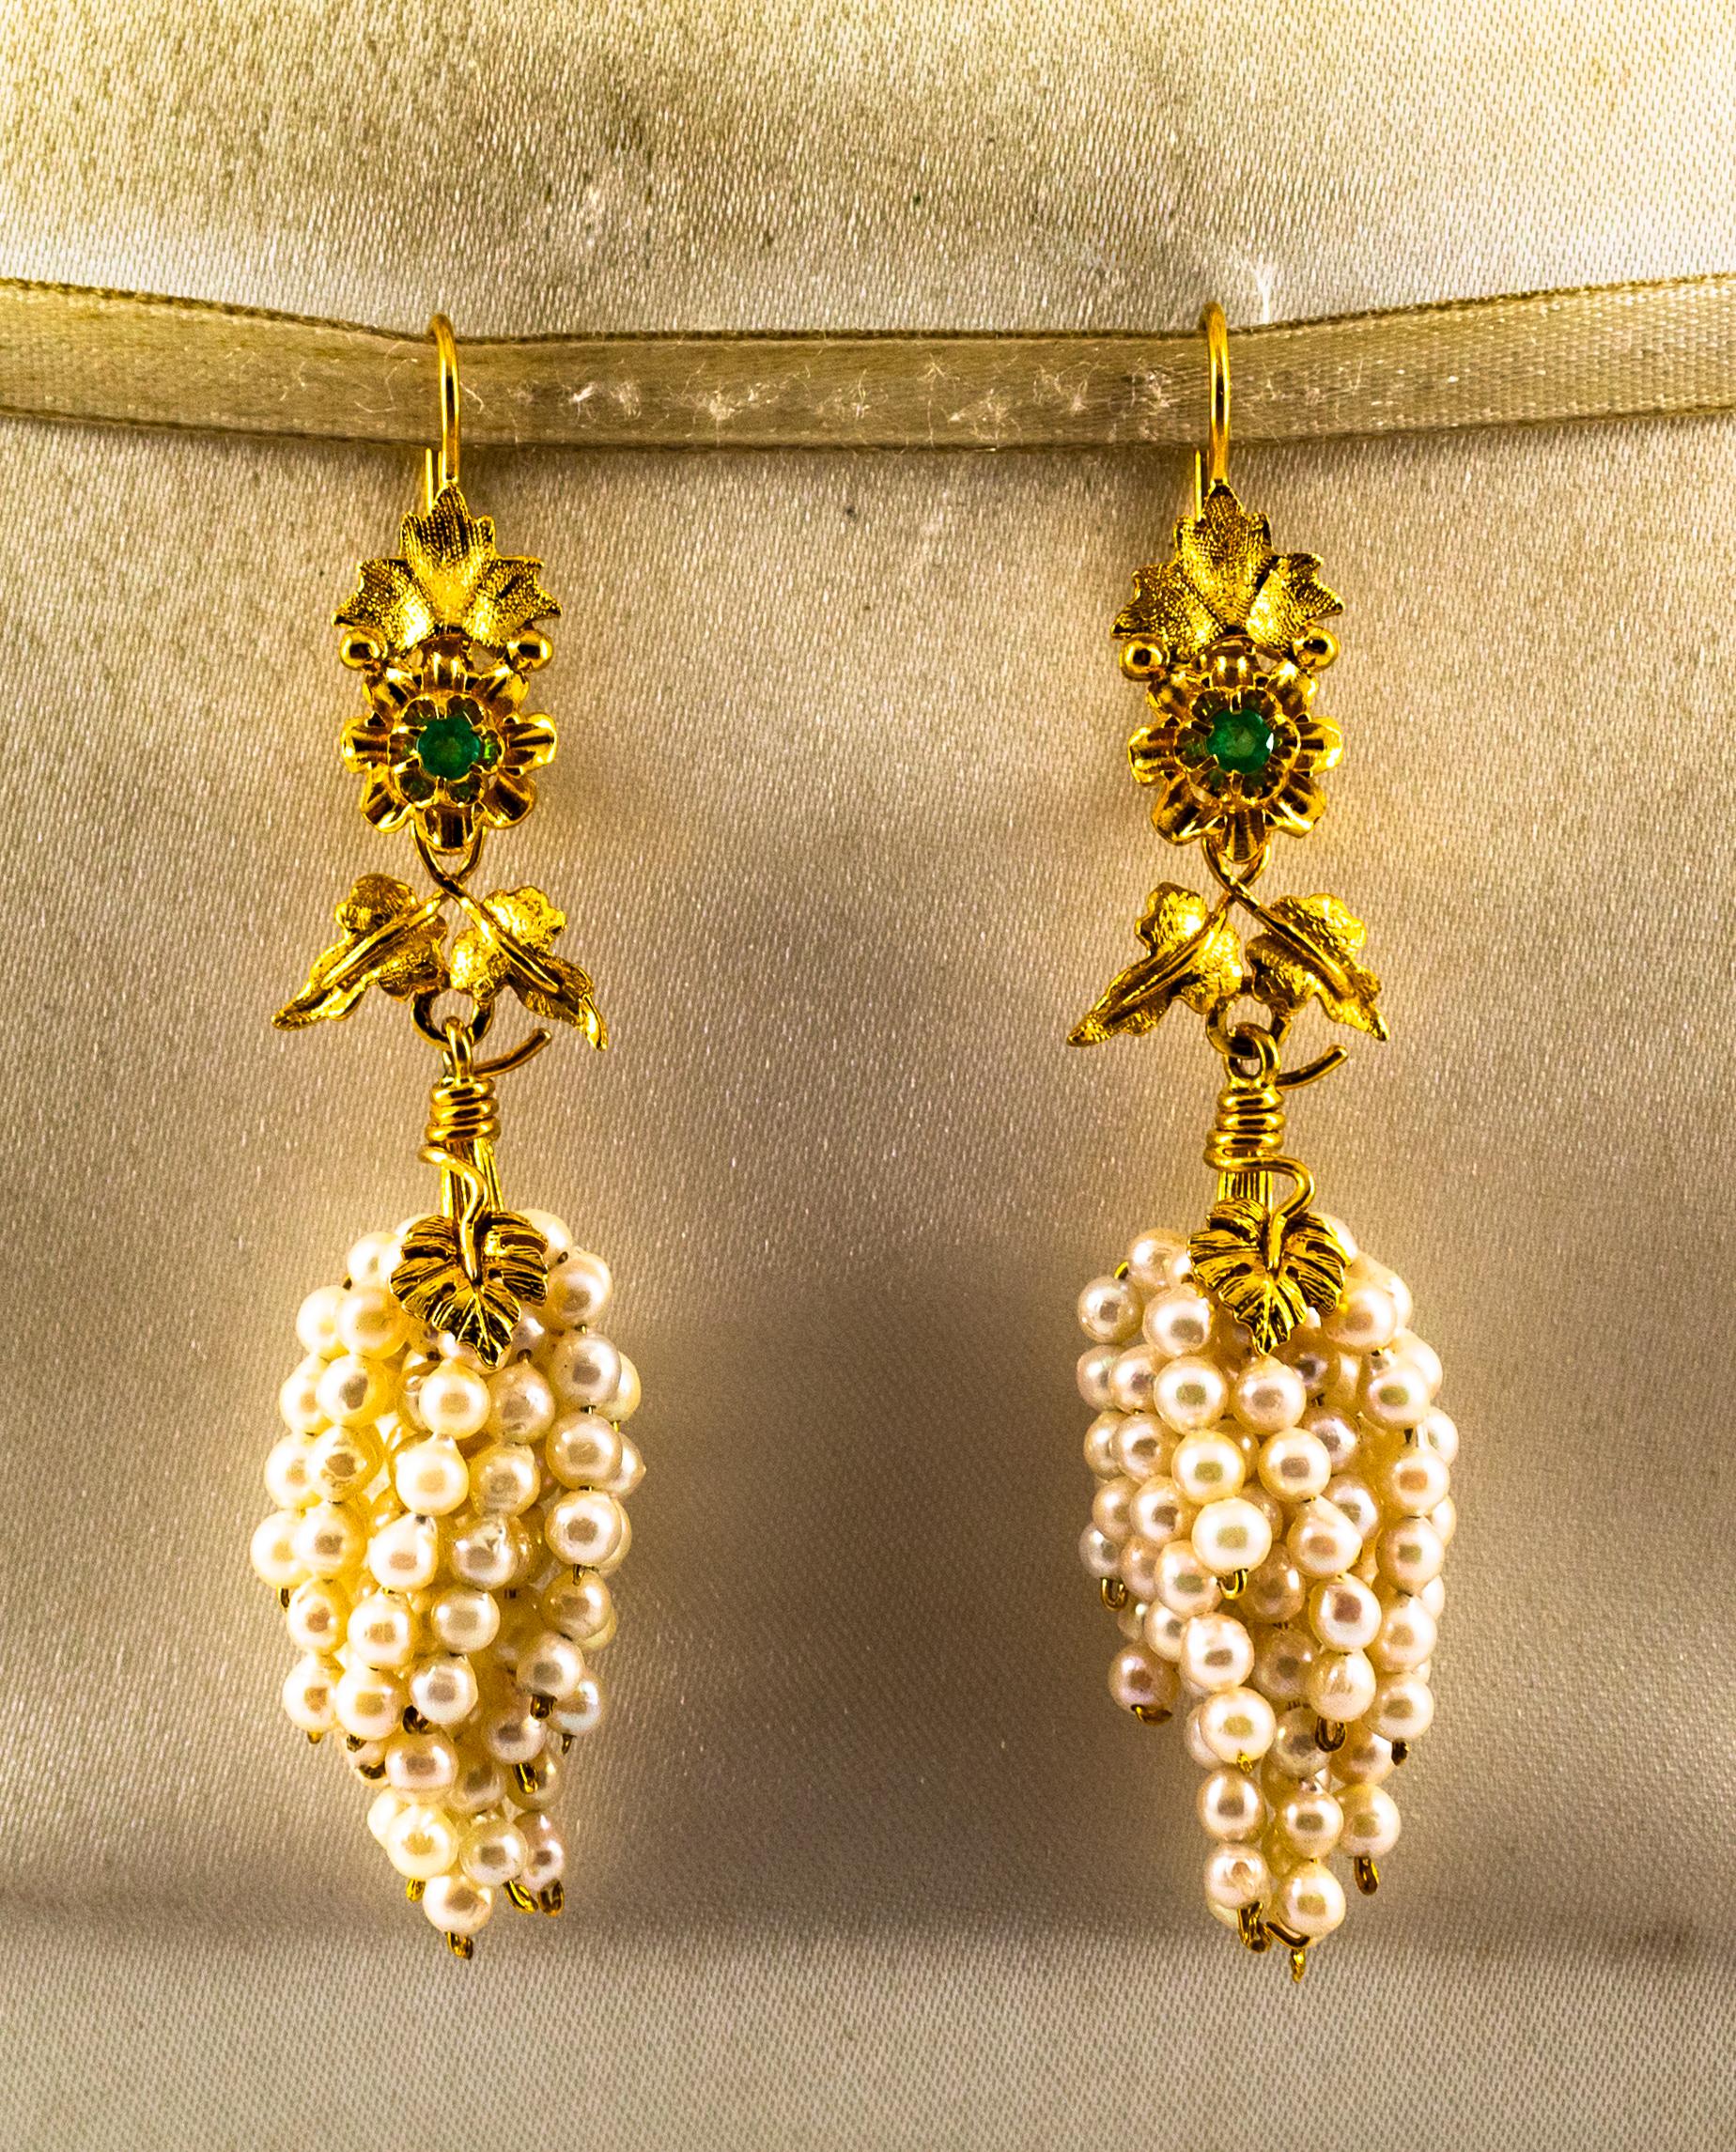 These Earrings are made of 9K Yellow Gold.
These Earrings have 0.12 Carat of Emeralds.
These Earrings have also Pearls.

All our Earrings have pins for pierced ears but we can change the closure and make any of our Earrings suitable even for